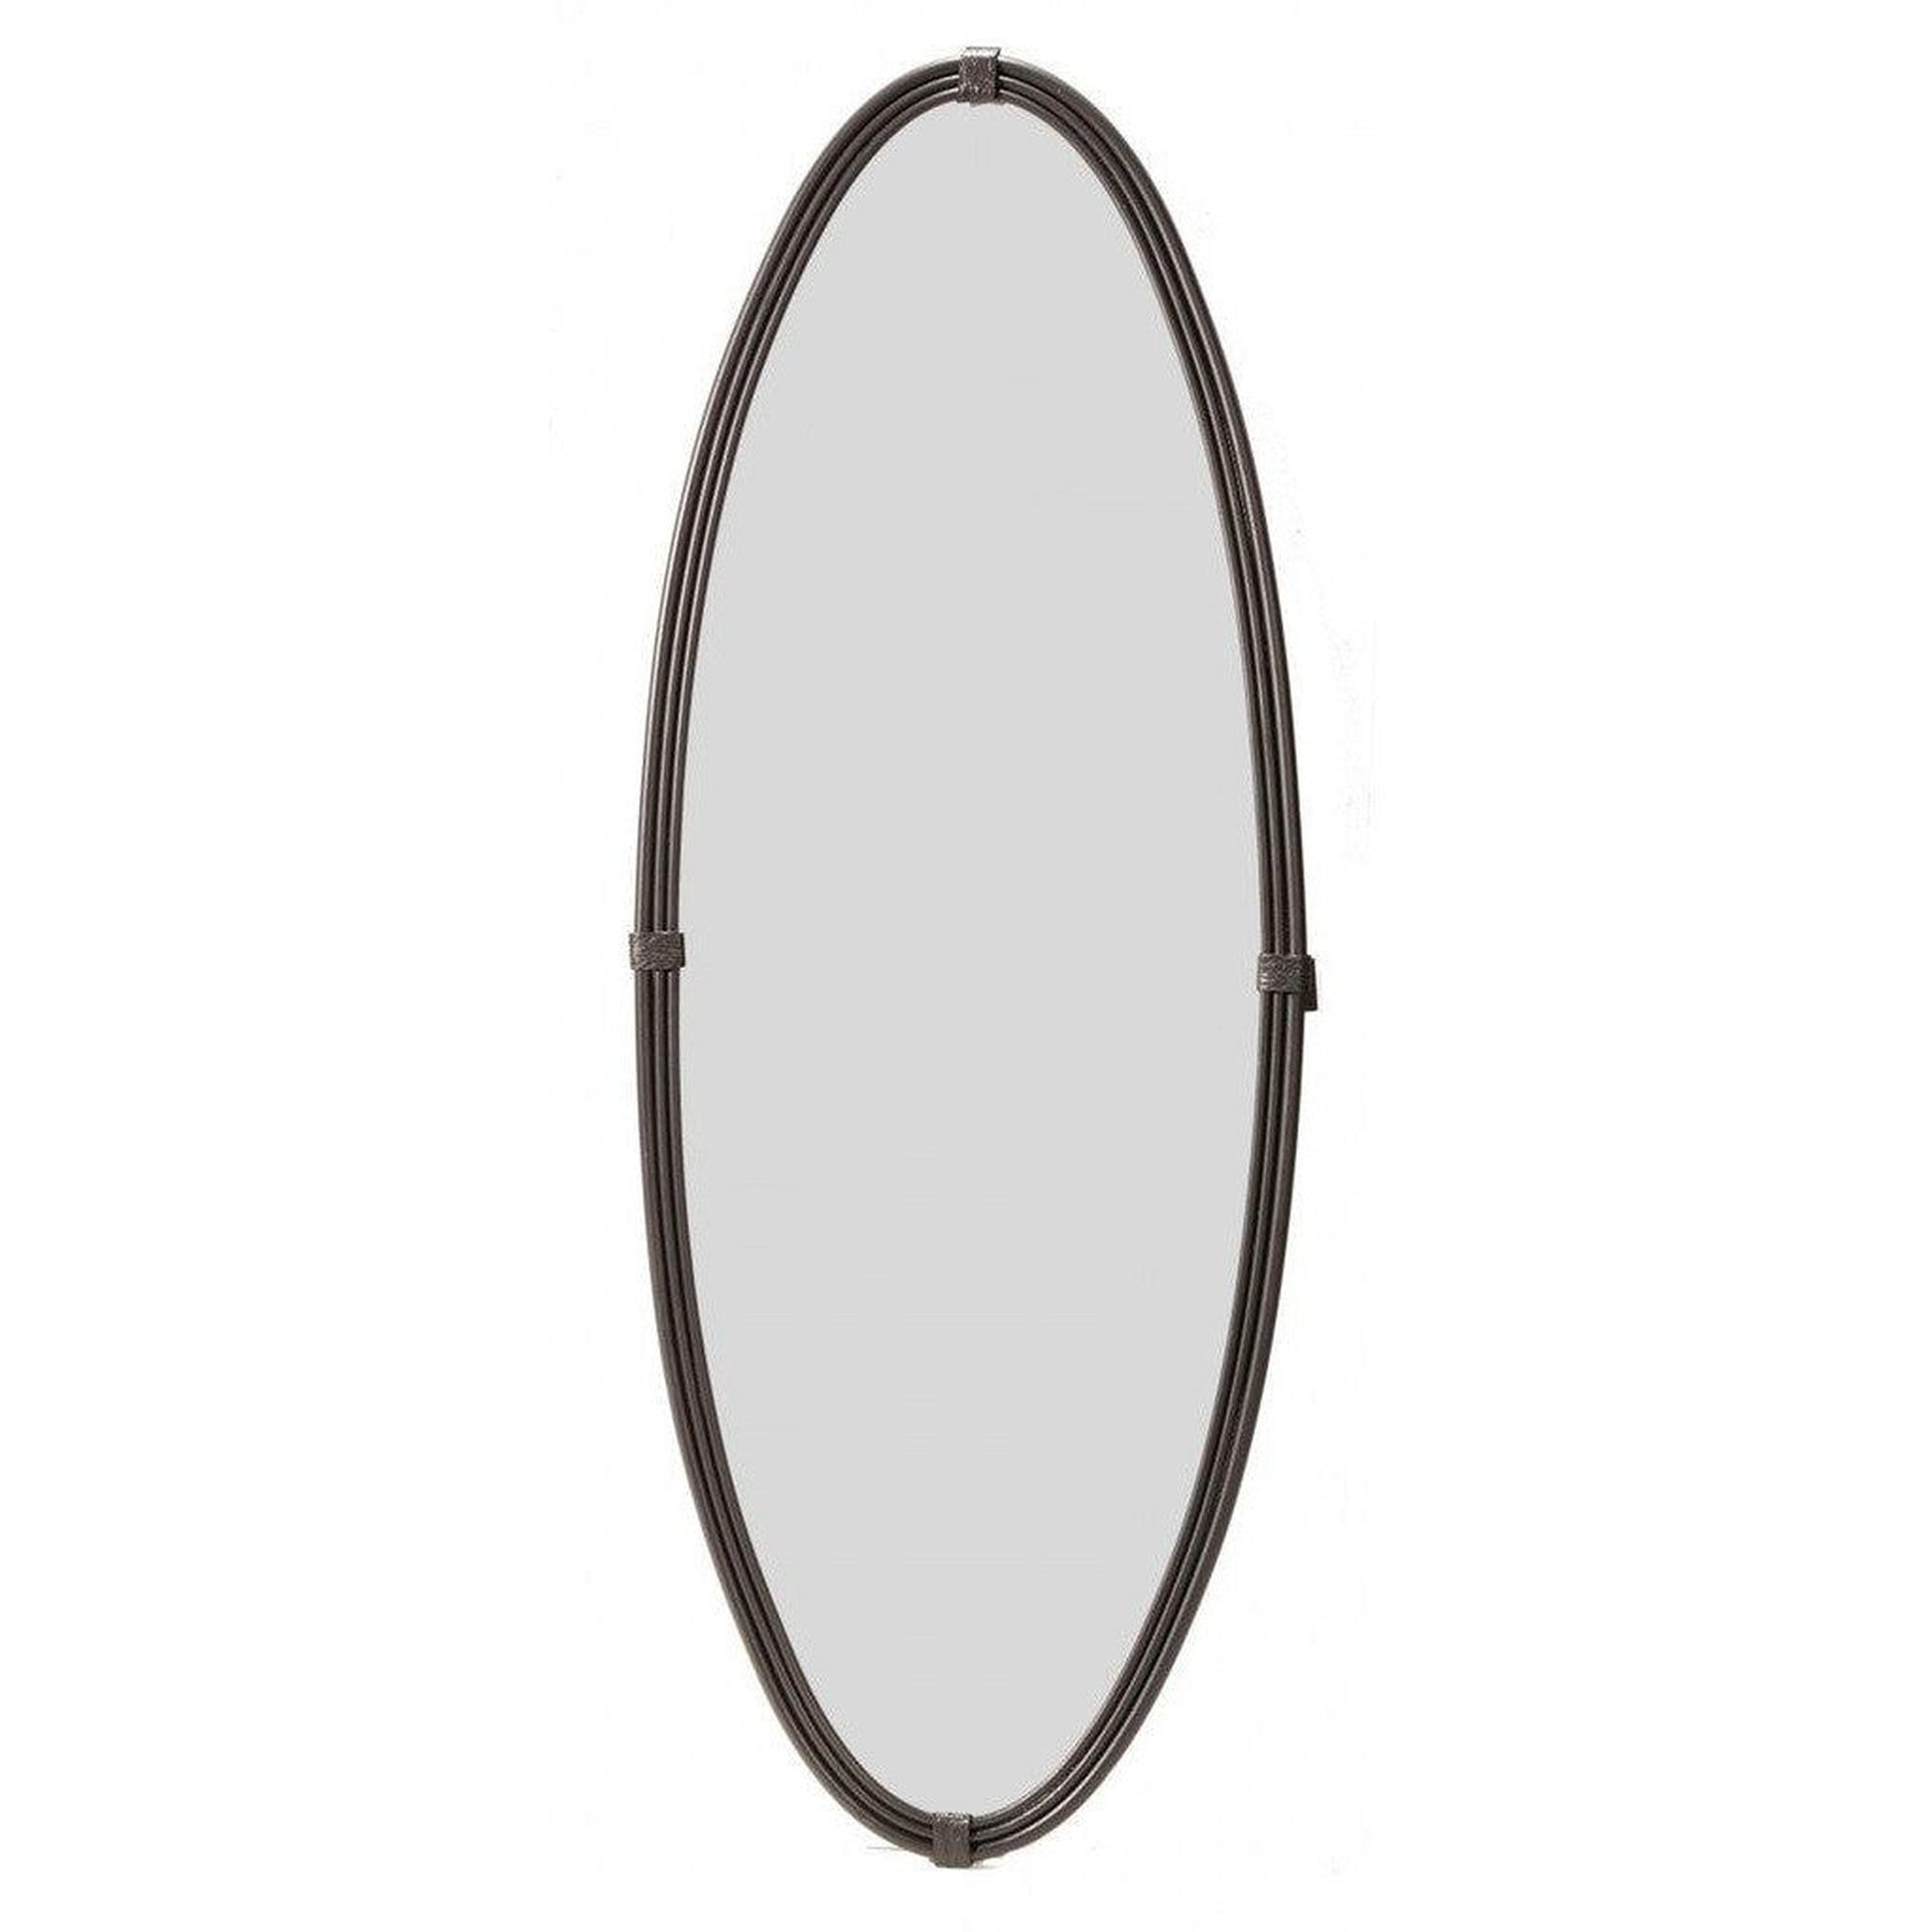 Stone County Ironworks Queensbury 19" Large Natural Black Oval Iron Wall Mirror With Pewter Iron Accent